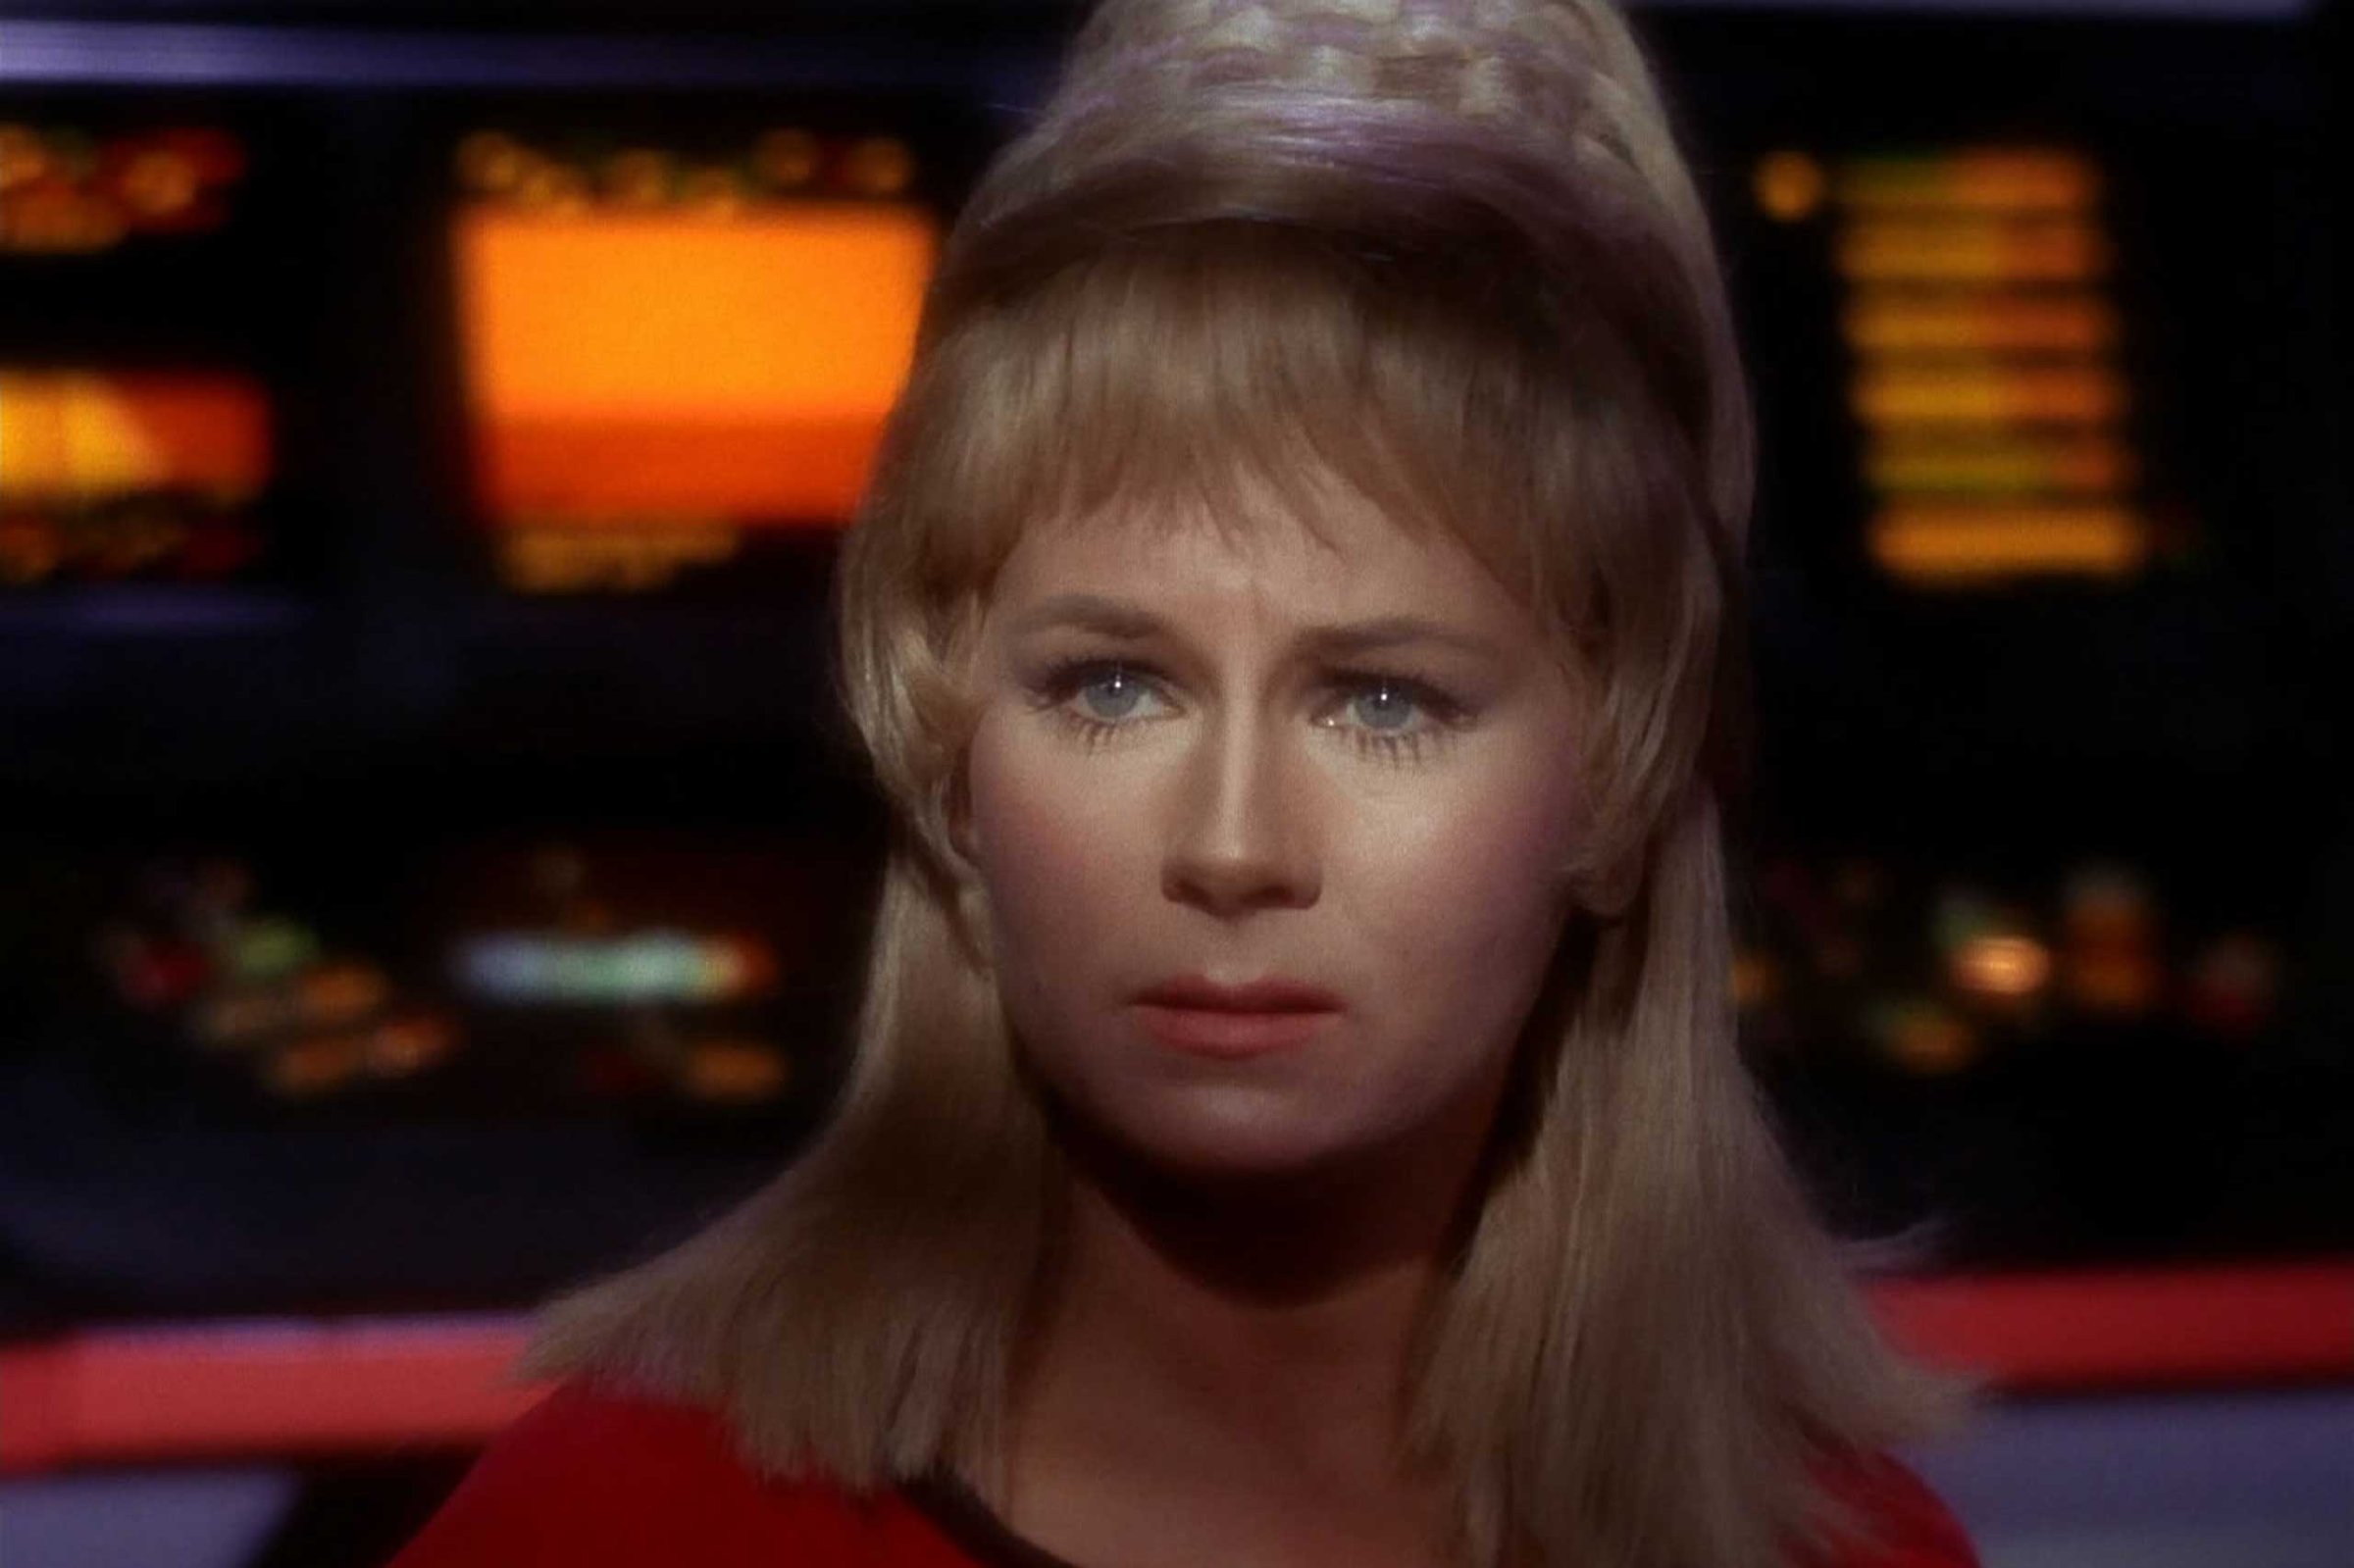 Actress Grace Lee Whitney, best known as Yeoman Rand on the original Star Trek television series, died at the age of 85 in Coarsegold, Calif. on May 3, 2015.